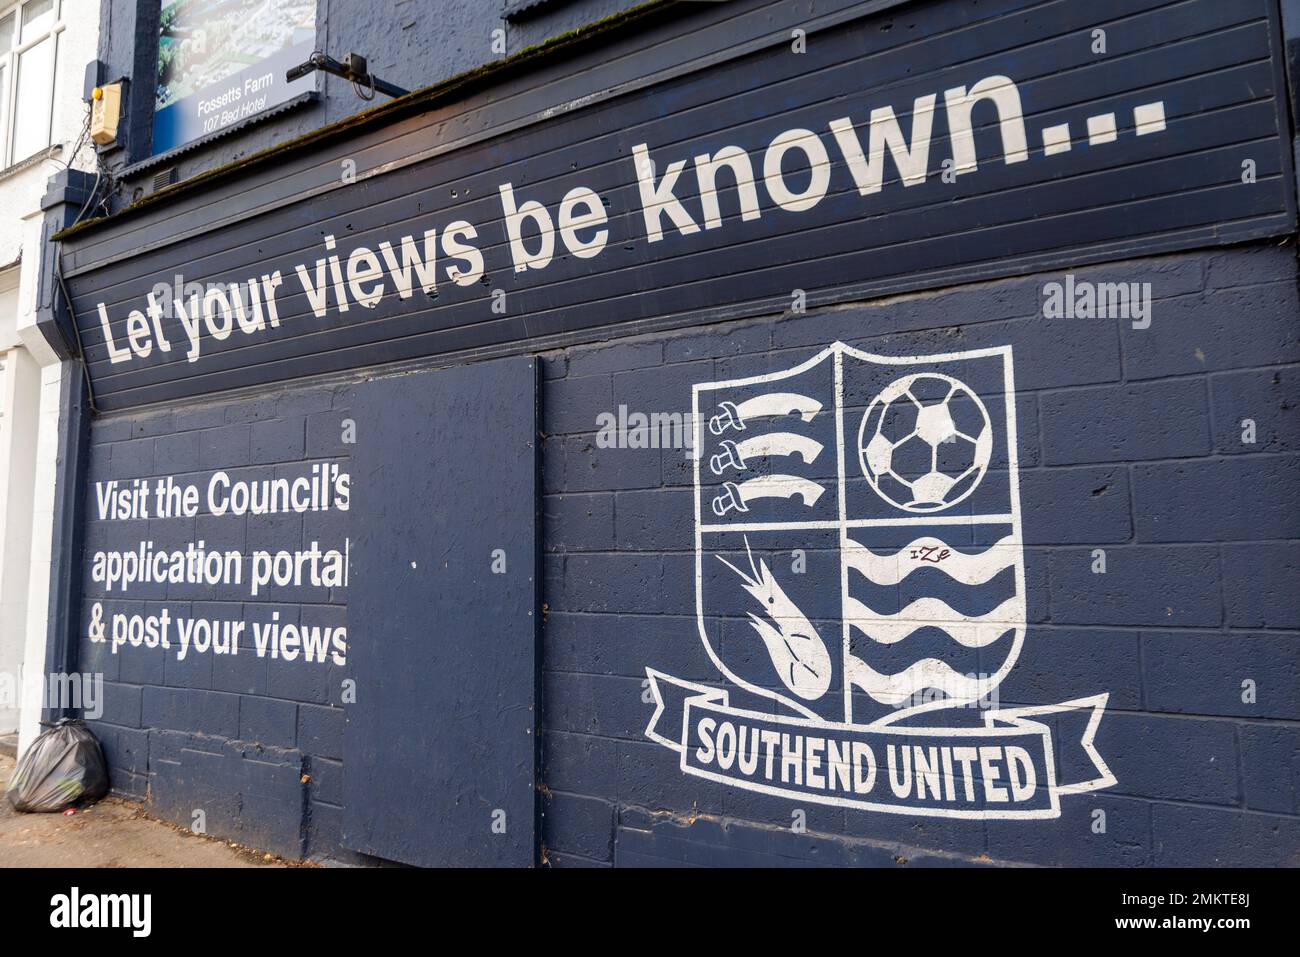 Let your views be known message at Roots Hall stadium of Southend Utd football ground, Southend on Sea, Essex, UK Stock Photo